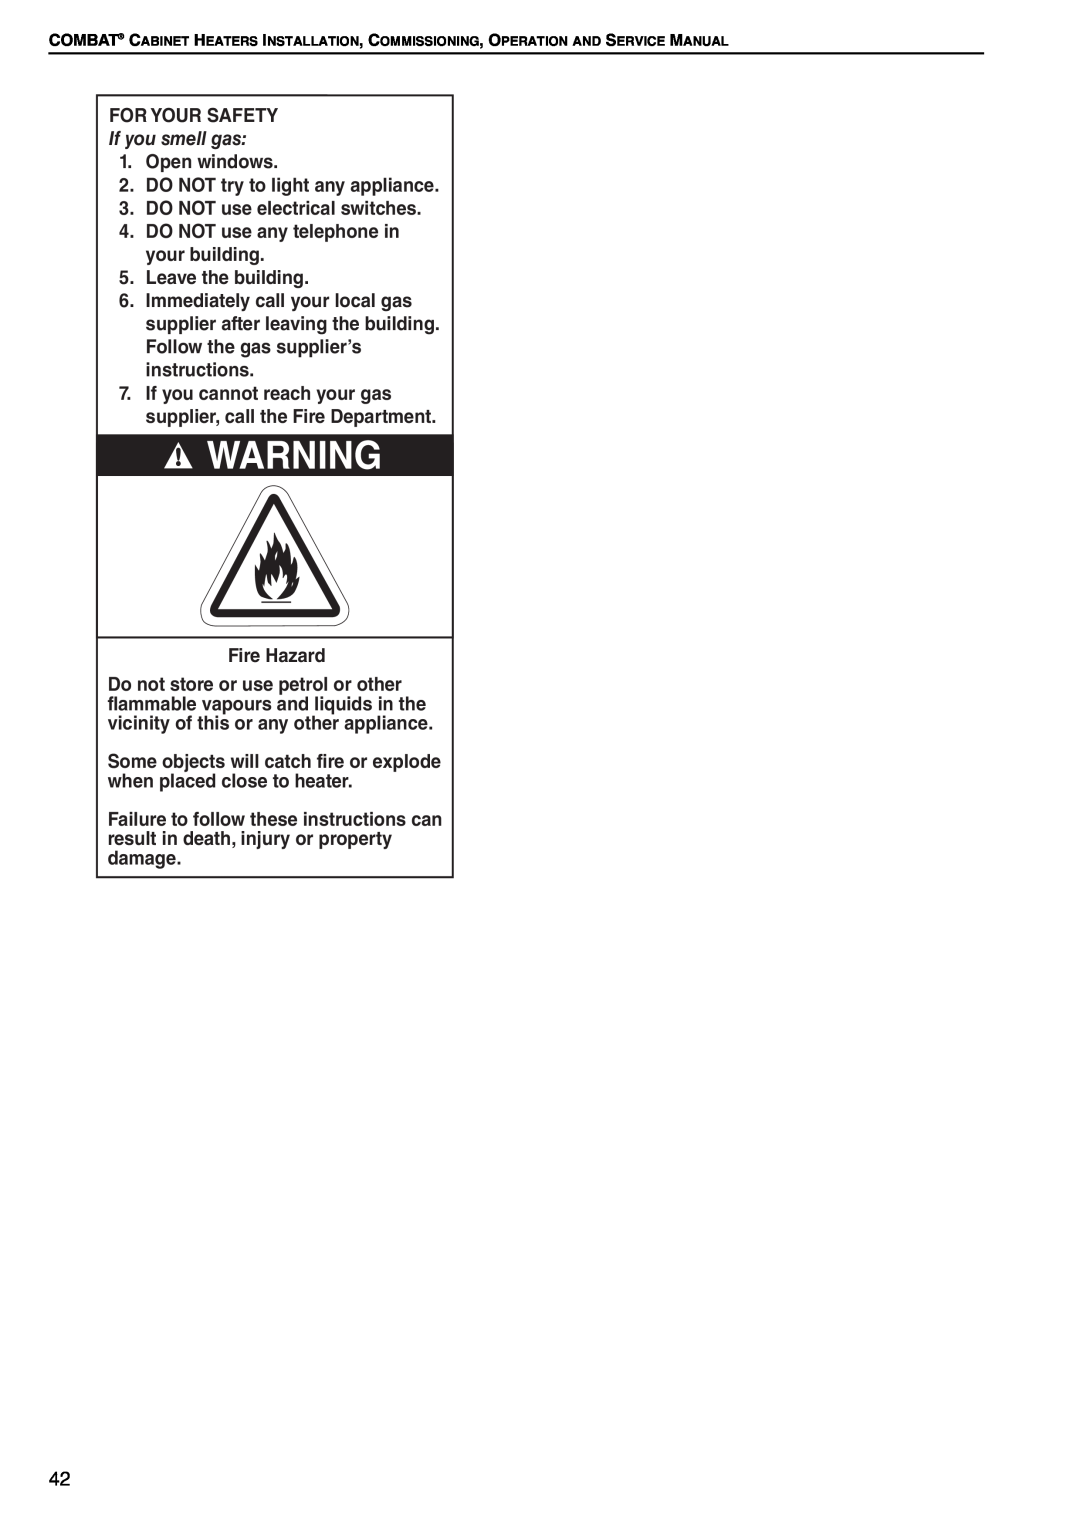 Roberts Gorden POP-ECA/PGP-ECA 015 to 0100 service manual For Your Safety, If you smell gas 